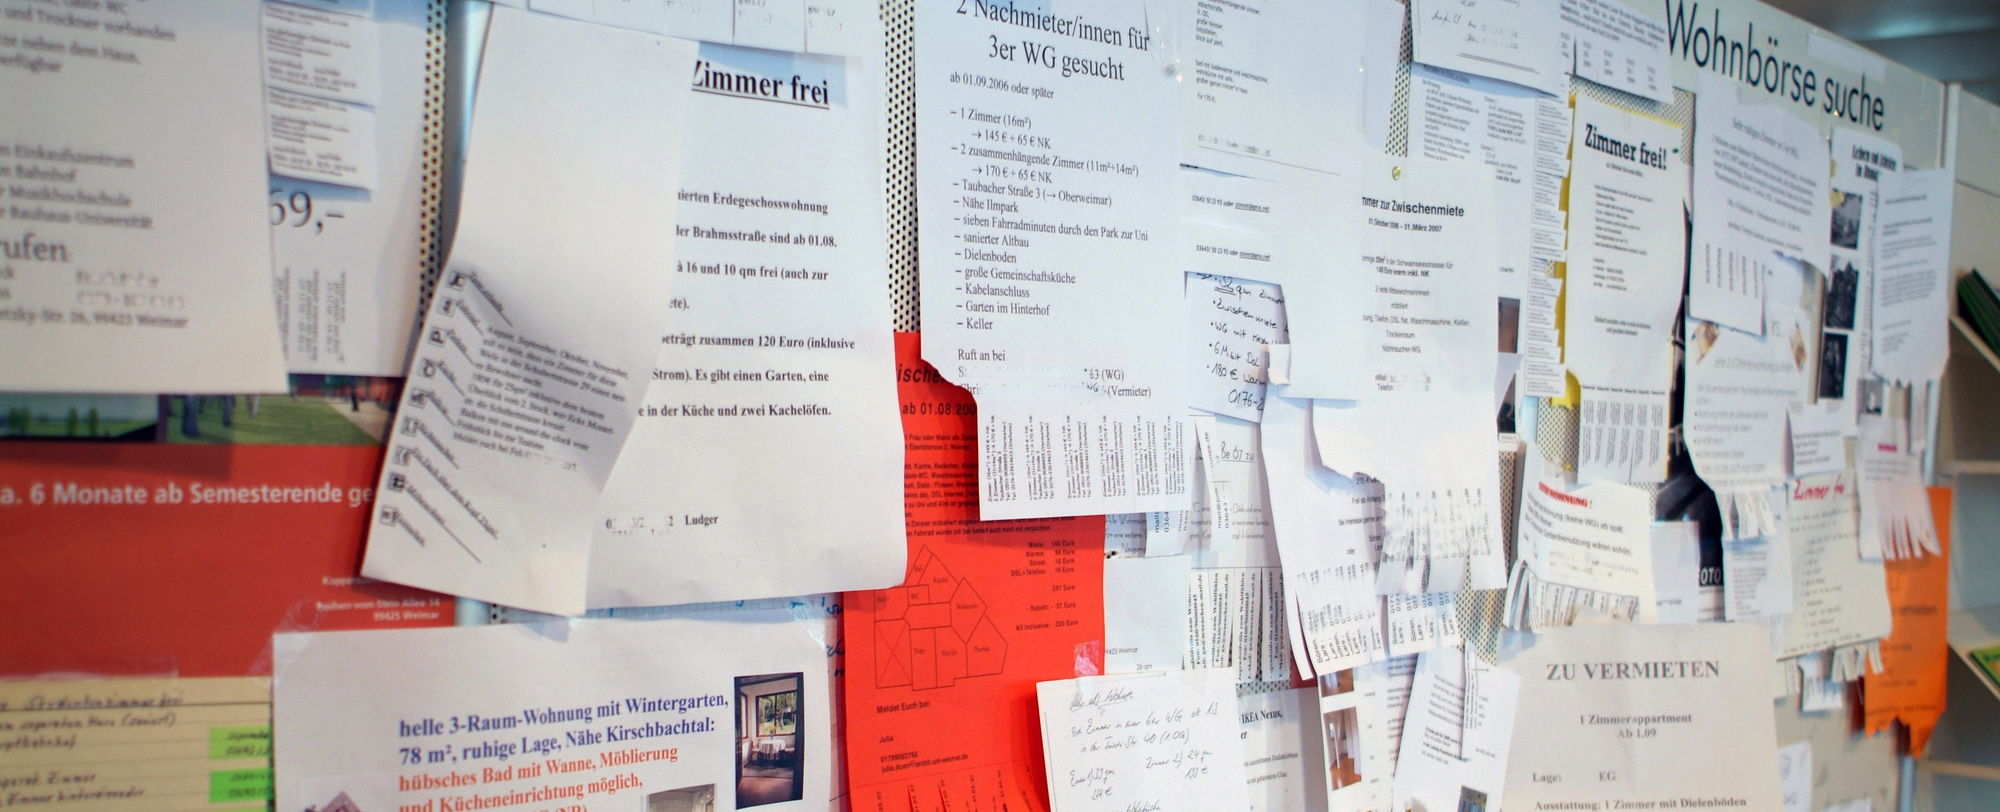 The picture shows slips of paper hanging on a bulletin board.